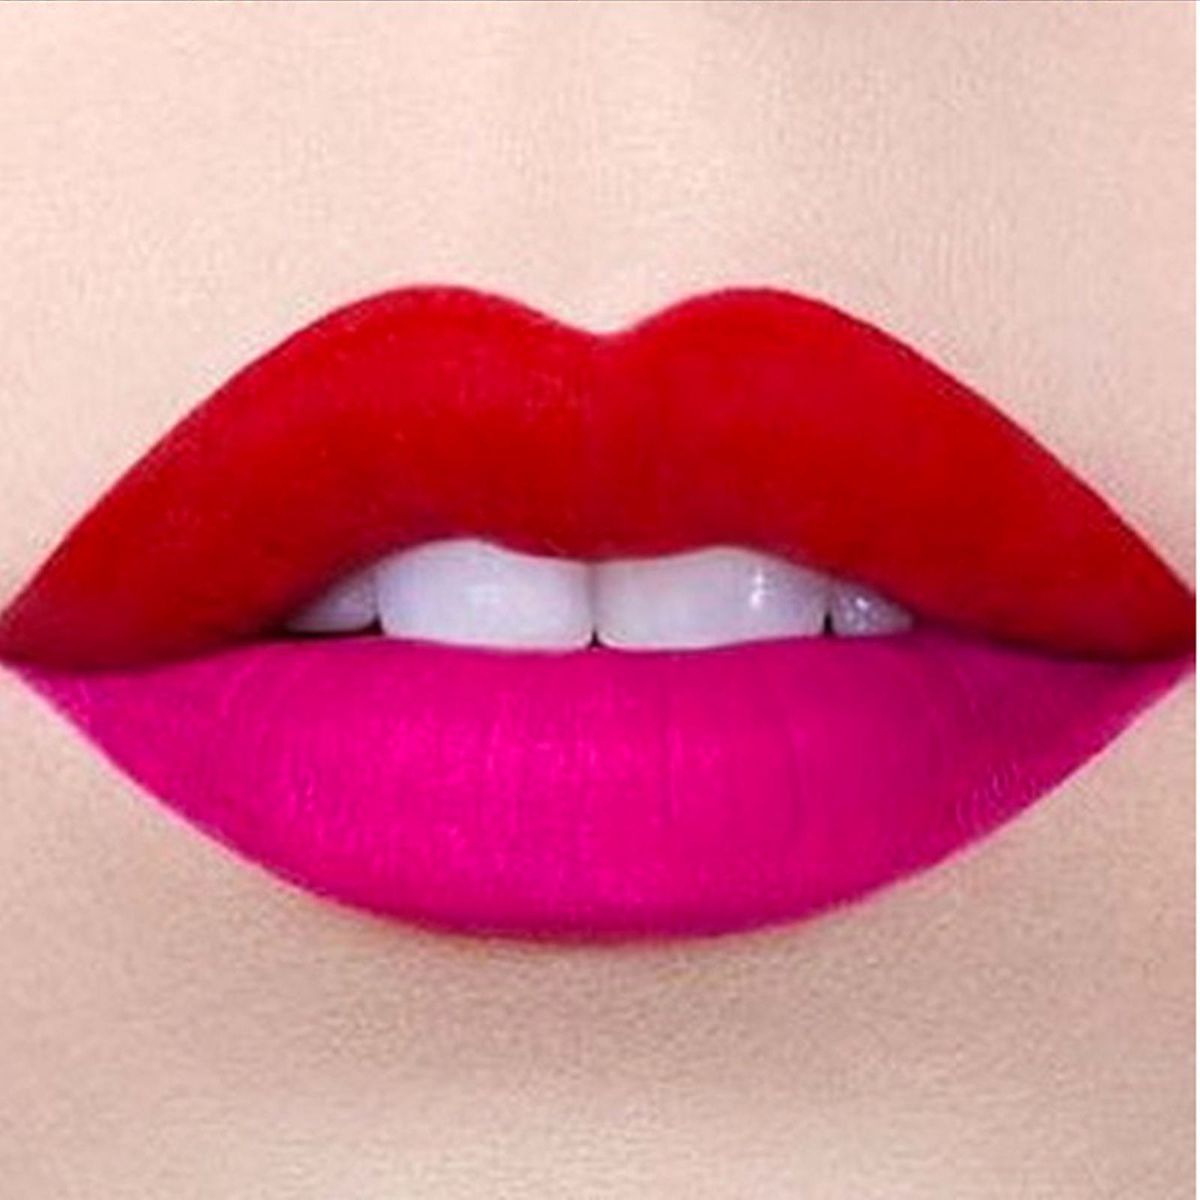 Two-toned lips hottest new trend